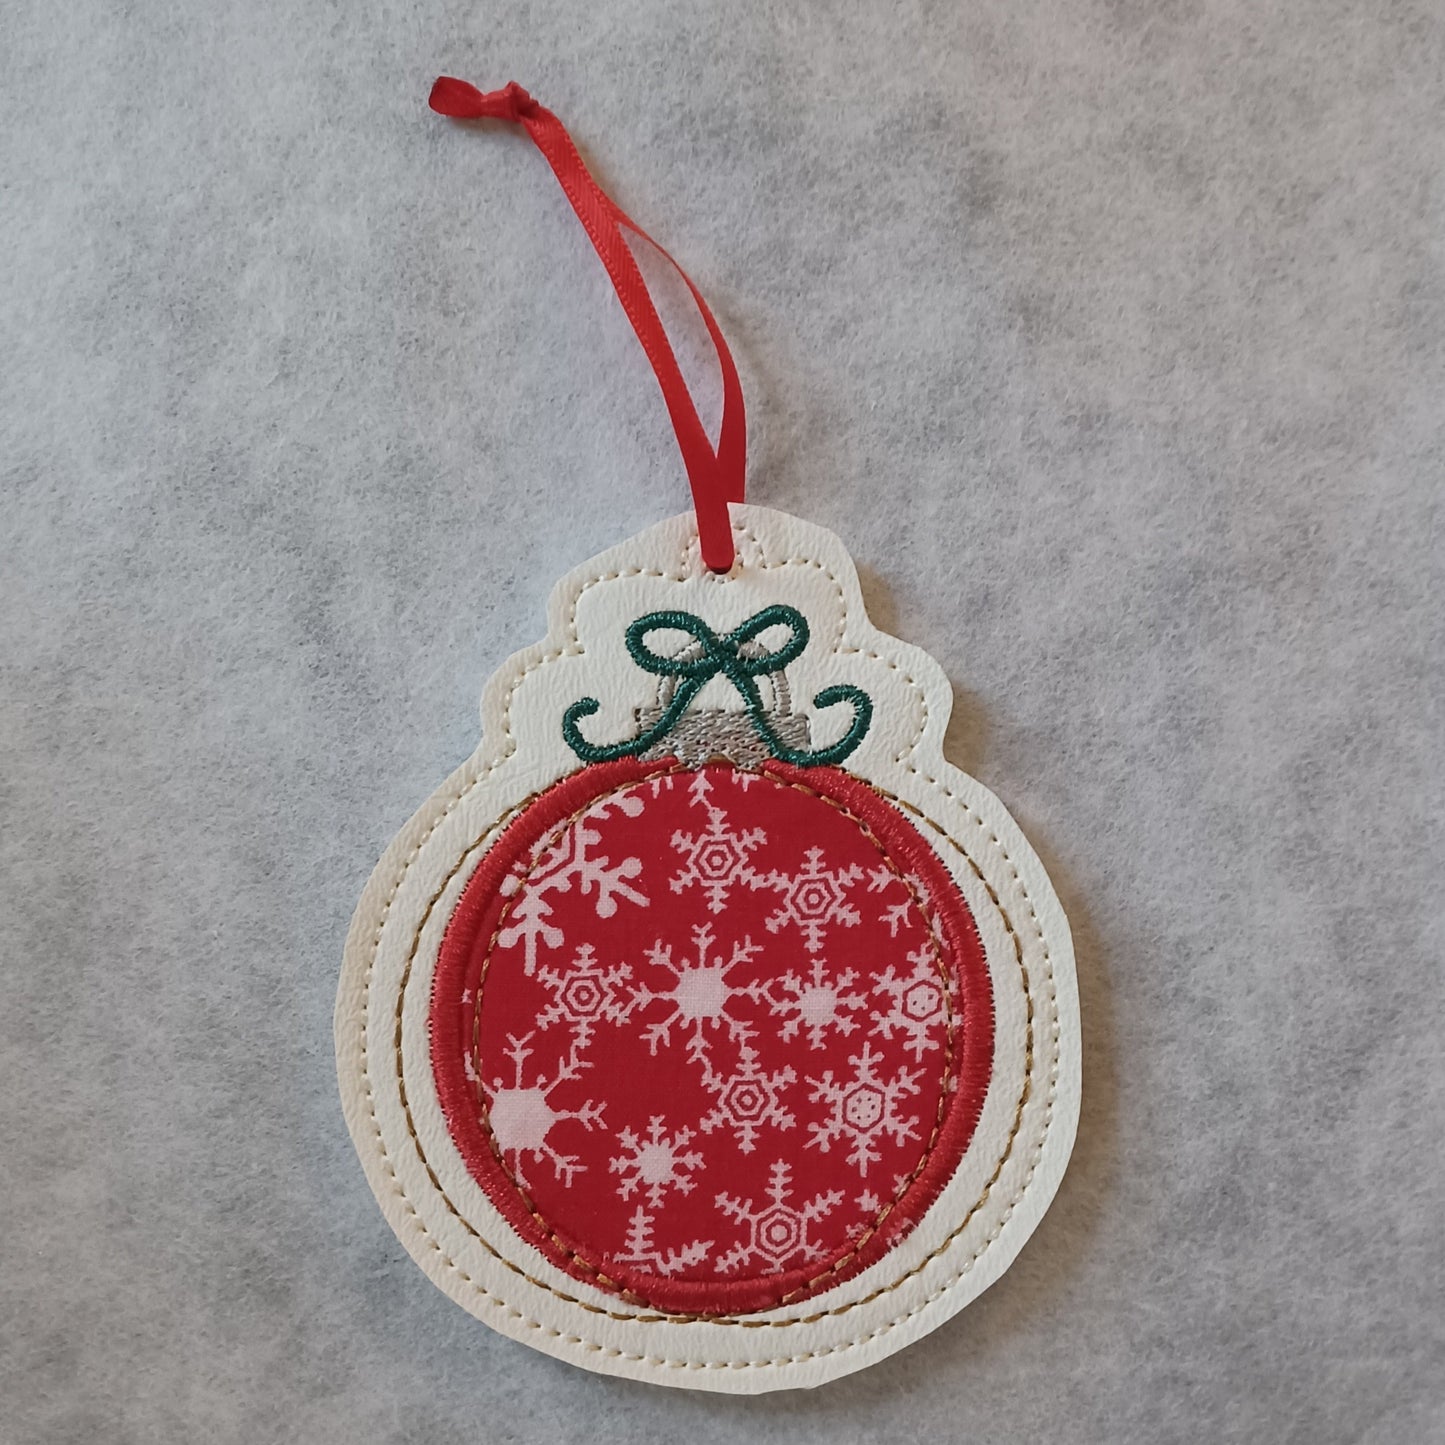 Minimalist Ball with Fabric Applique Embroidered Ornament